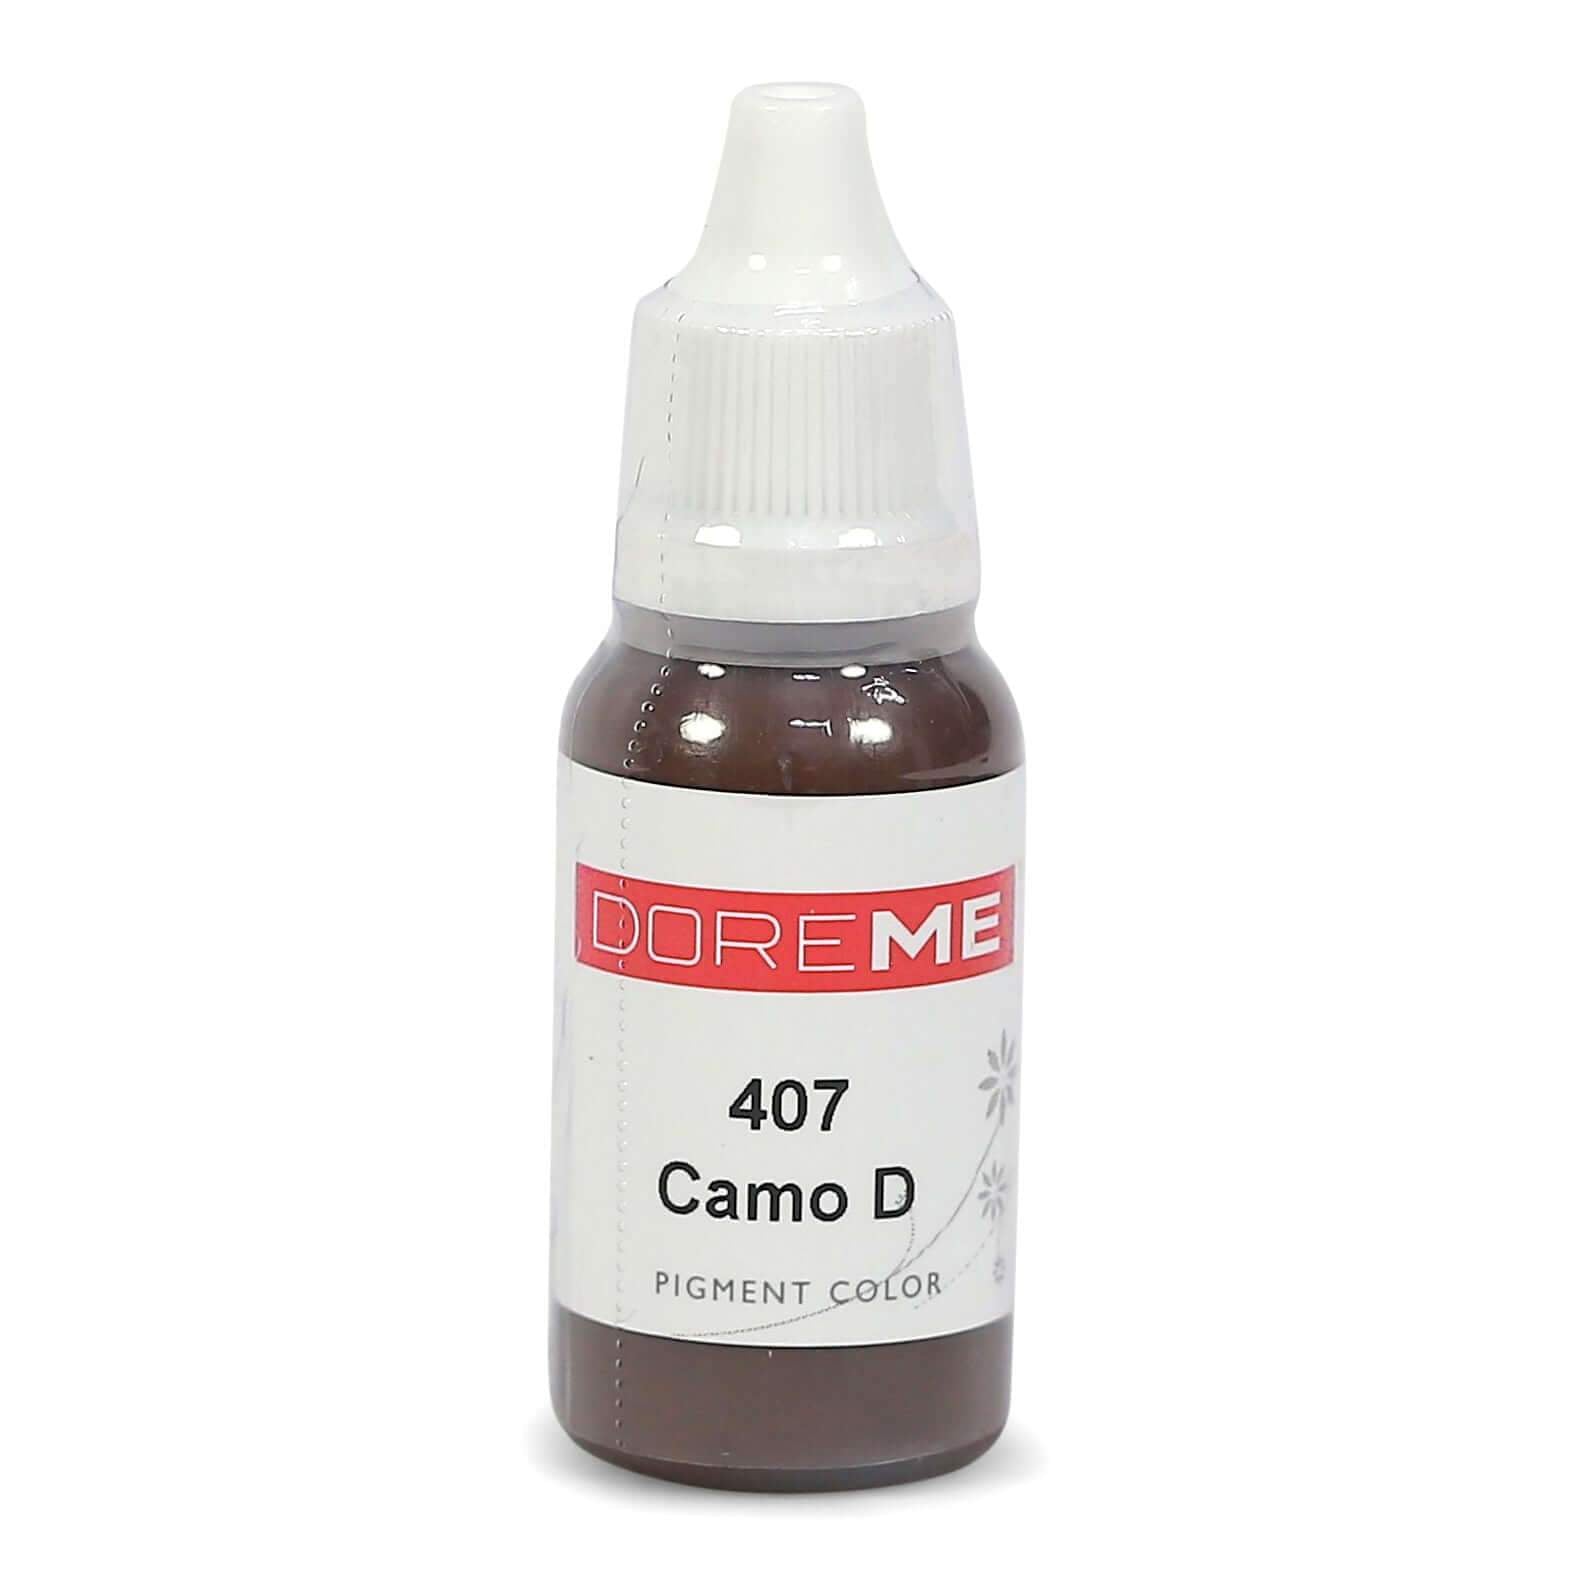 Doreme Skin Camouflage Pigments 407 Camo D (c) - Beautiful Ink UK trade and wholesale supplier